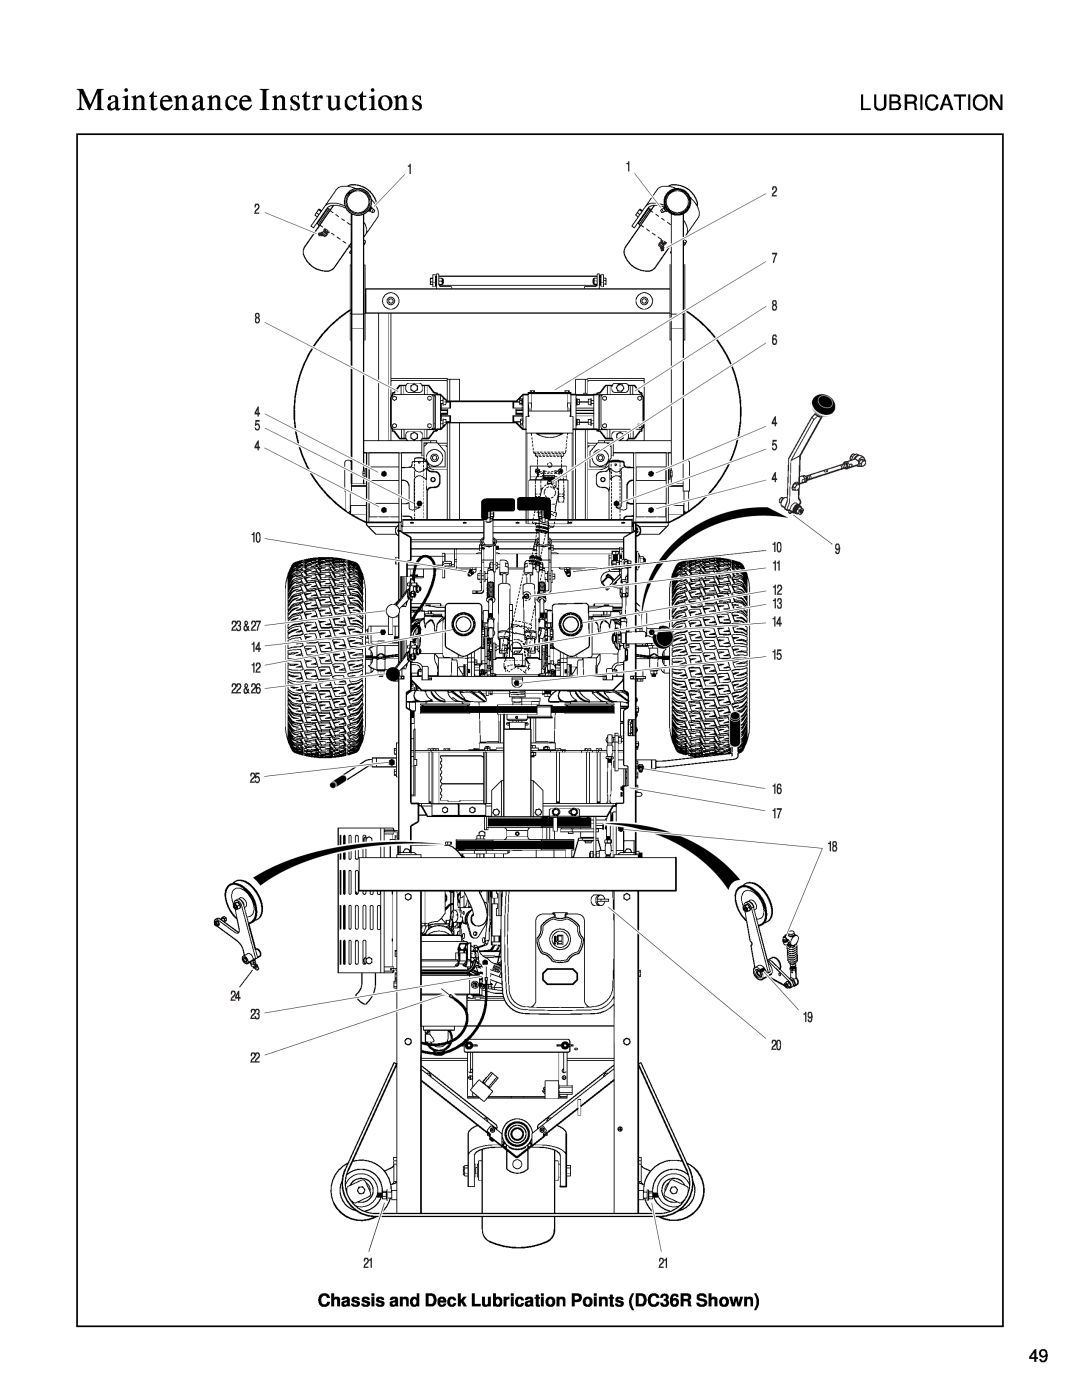 Walker S14 manual Maintenance Instructions, Chassis and Deck Lubrication Points DC36R Shown, 23, 22 